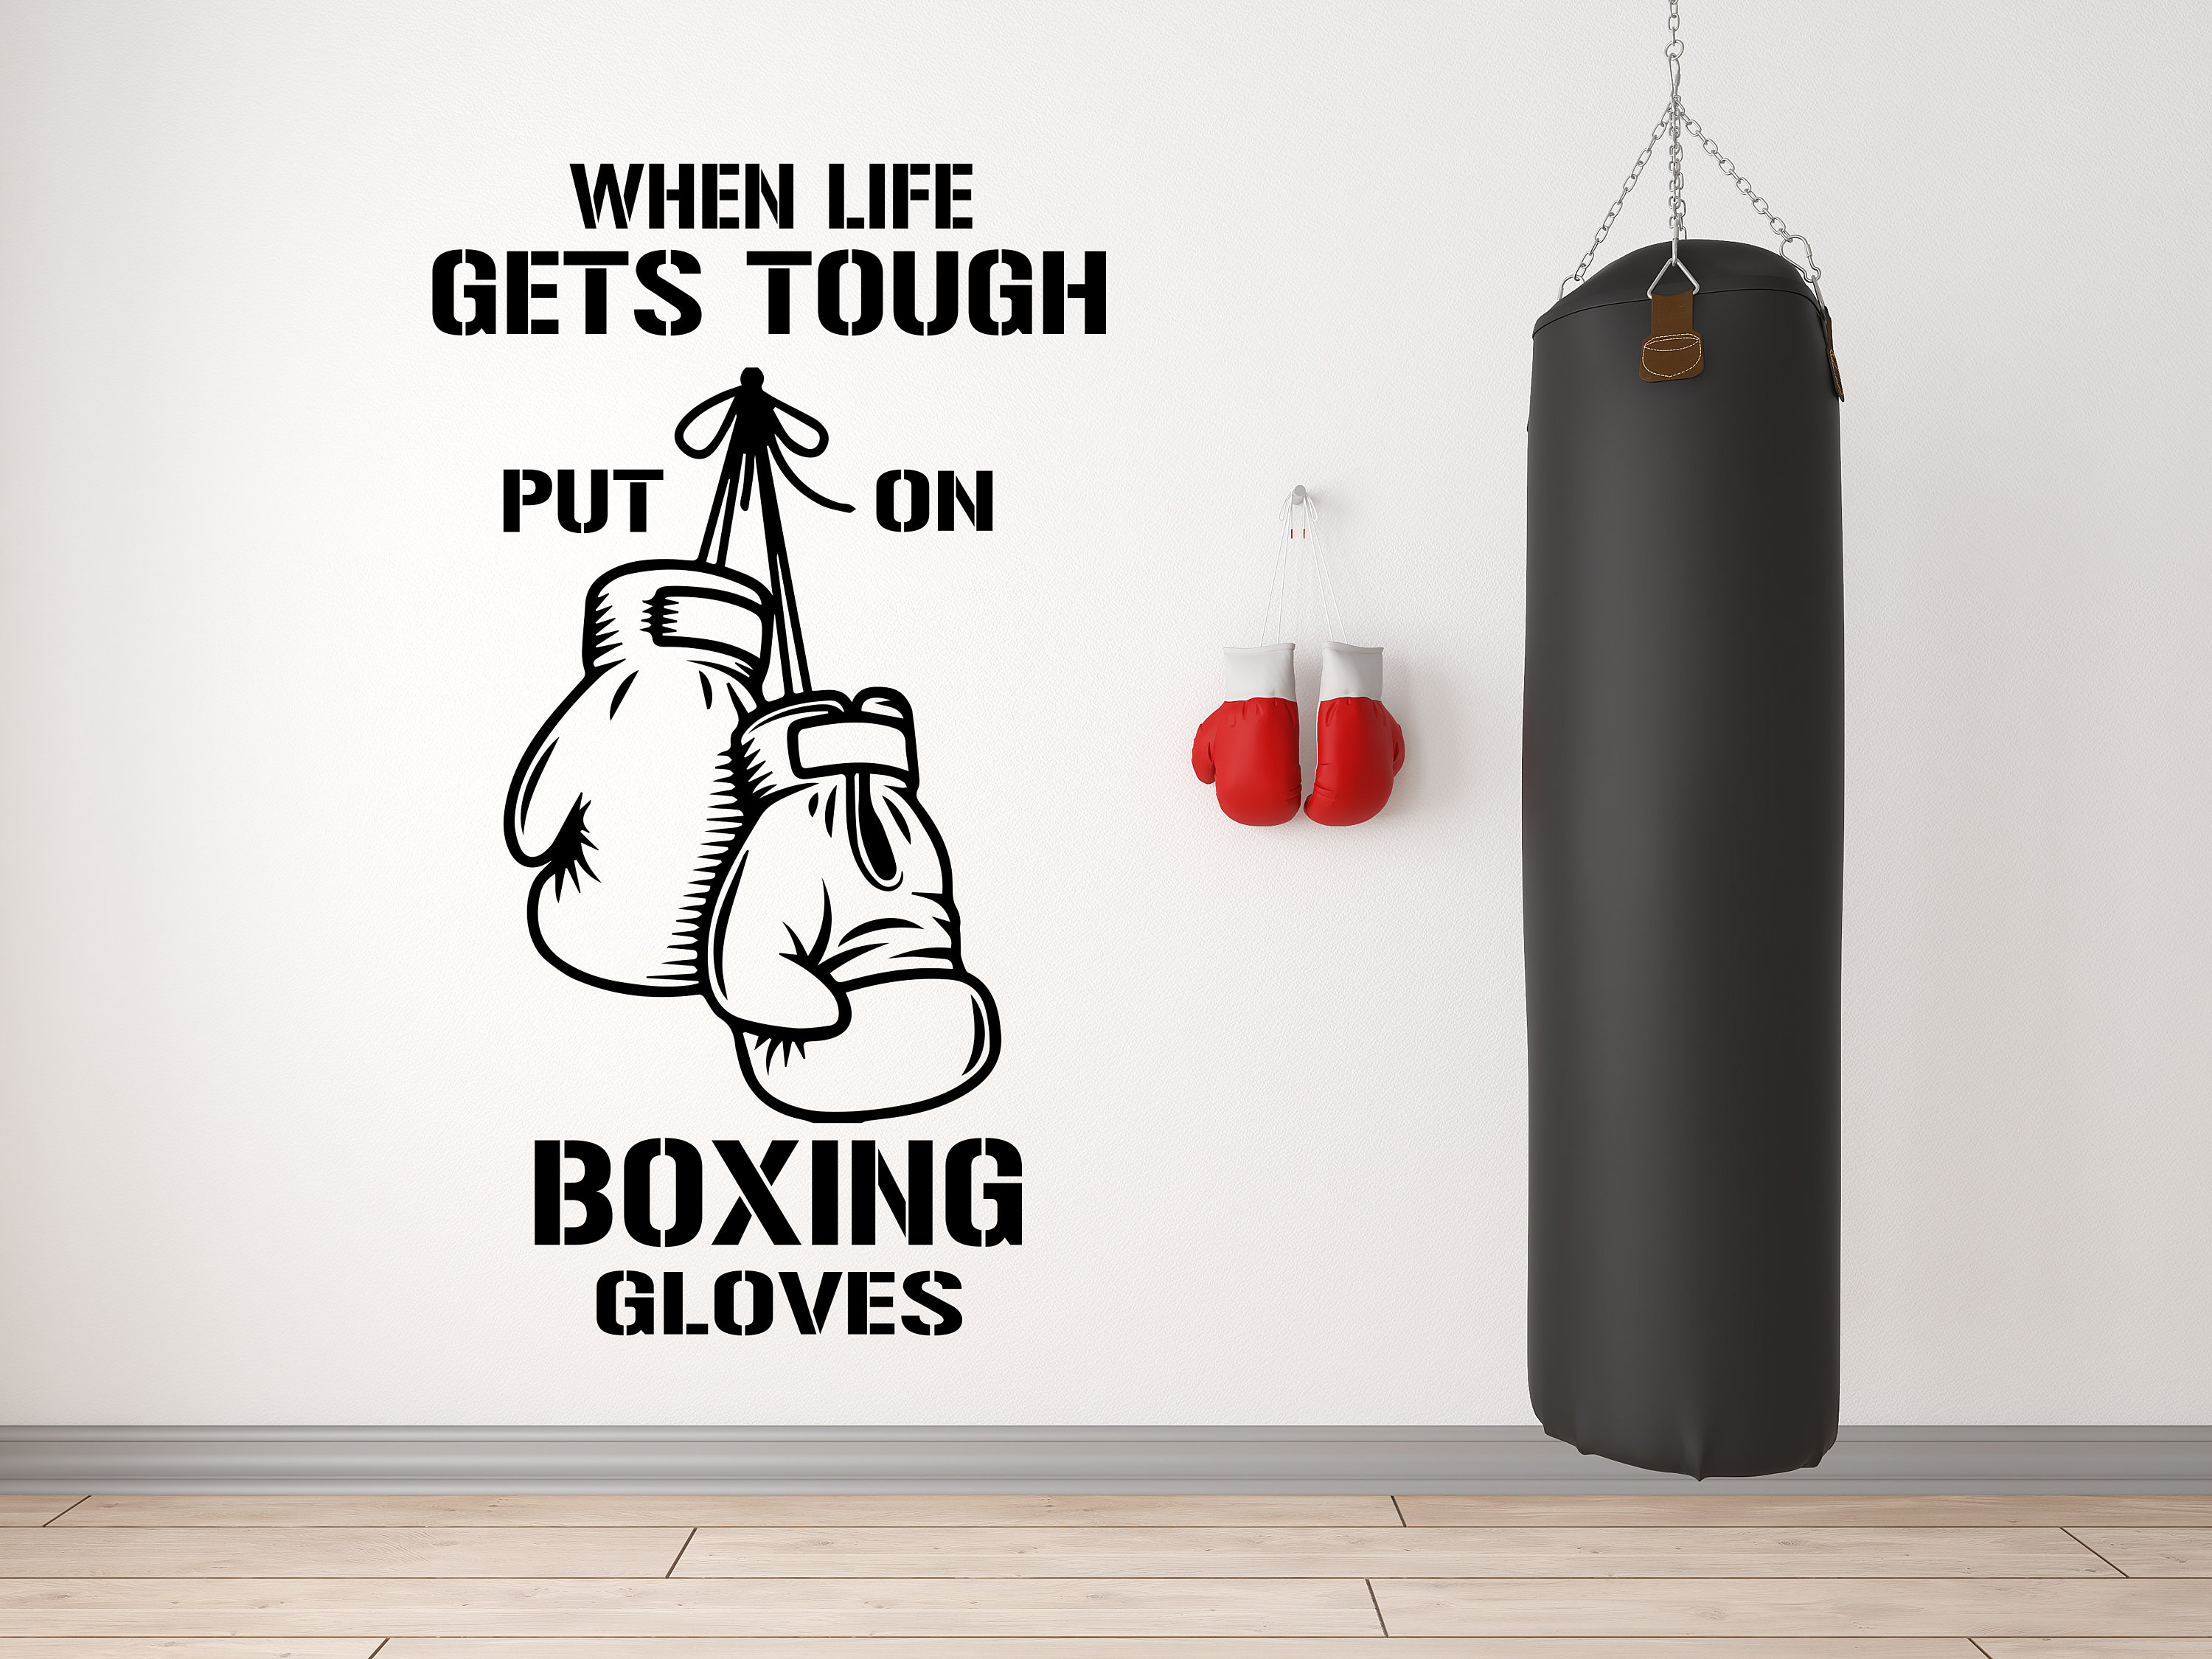 Boxing is My Therapy Wallsticker Boxing Gym Boxing Wall Sticker Boxing Mural  Boxing Gifts Boxer Wall Art Thevinylcreations 